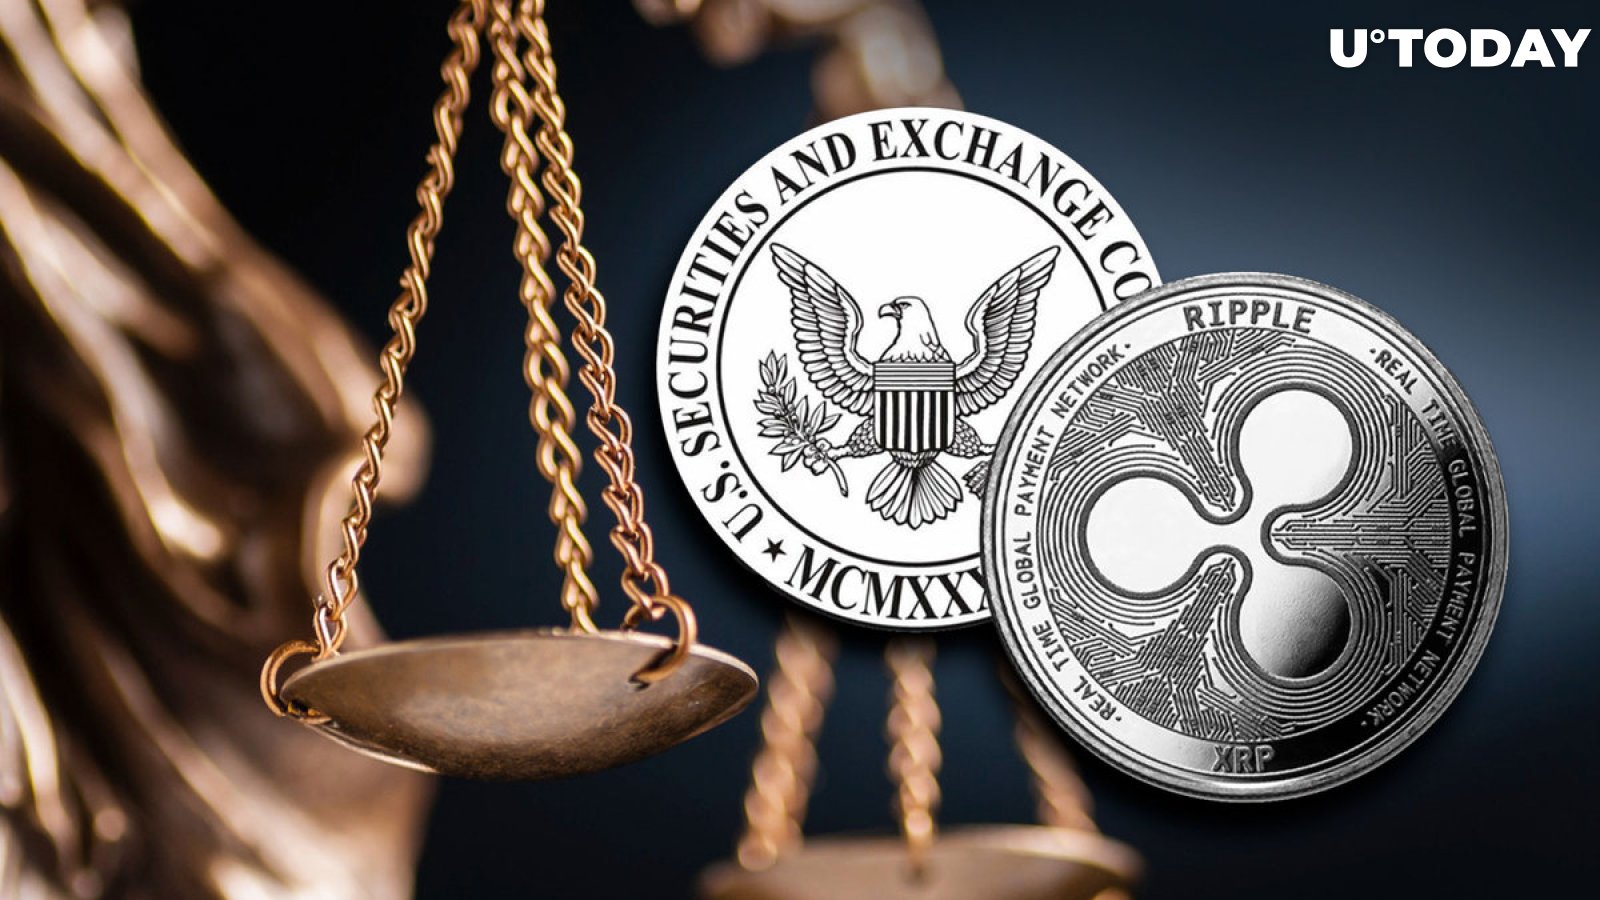 Ripple Lawsuit: Here Are Three Things Not Going to Trial, CryptoLaw States